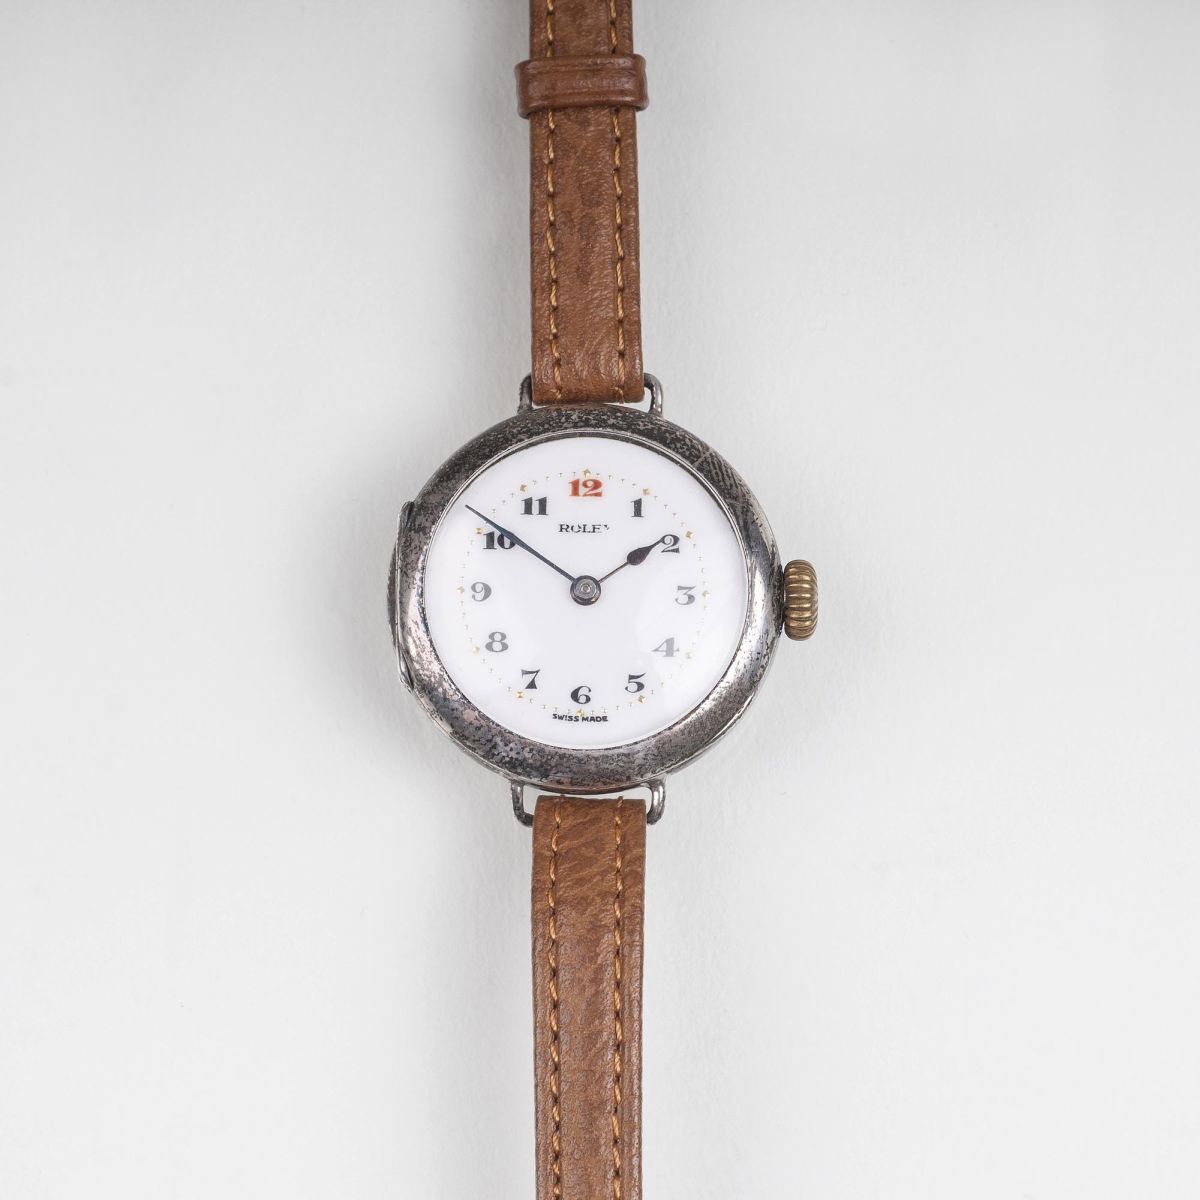 A Military Watch